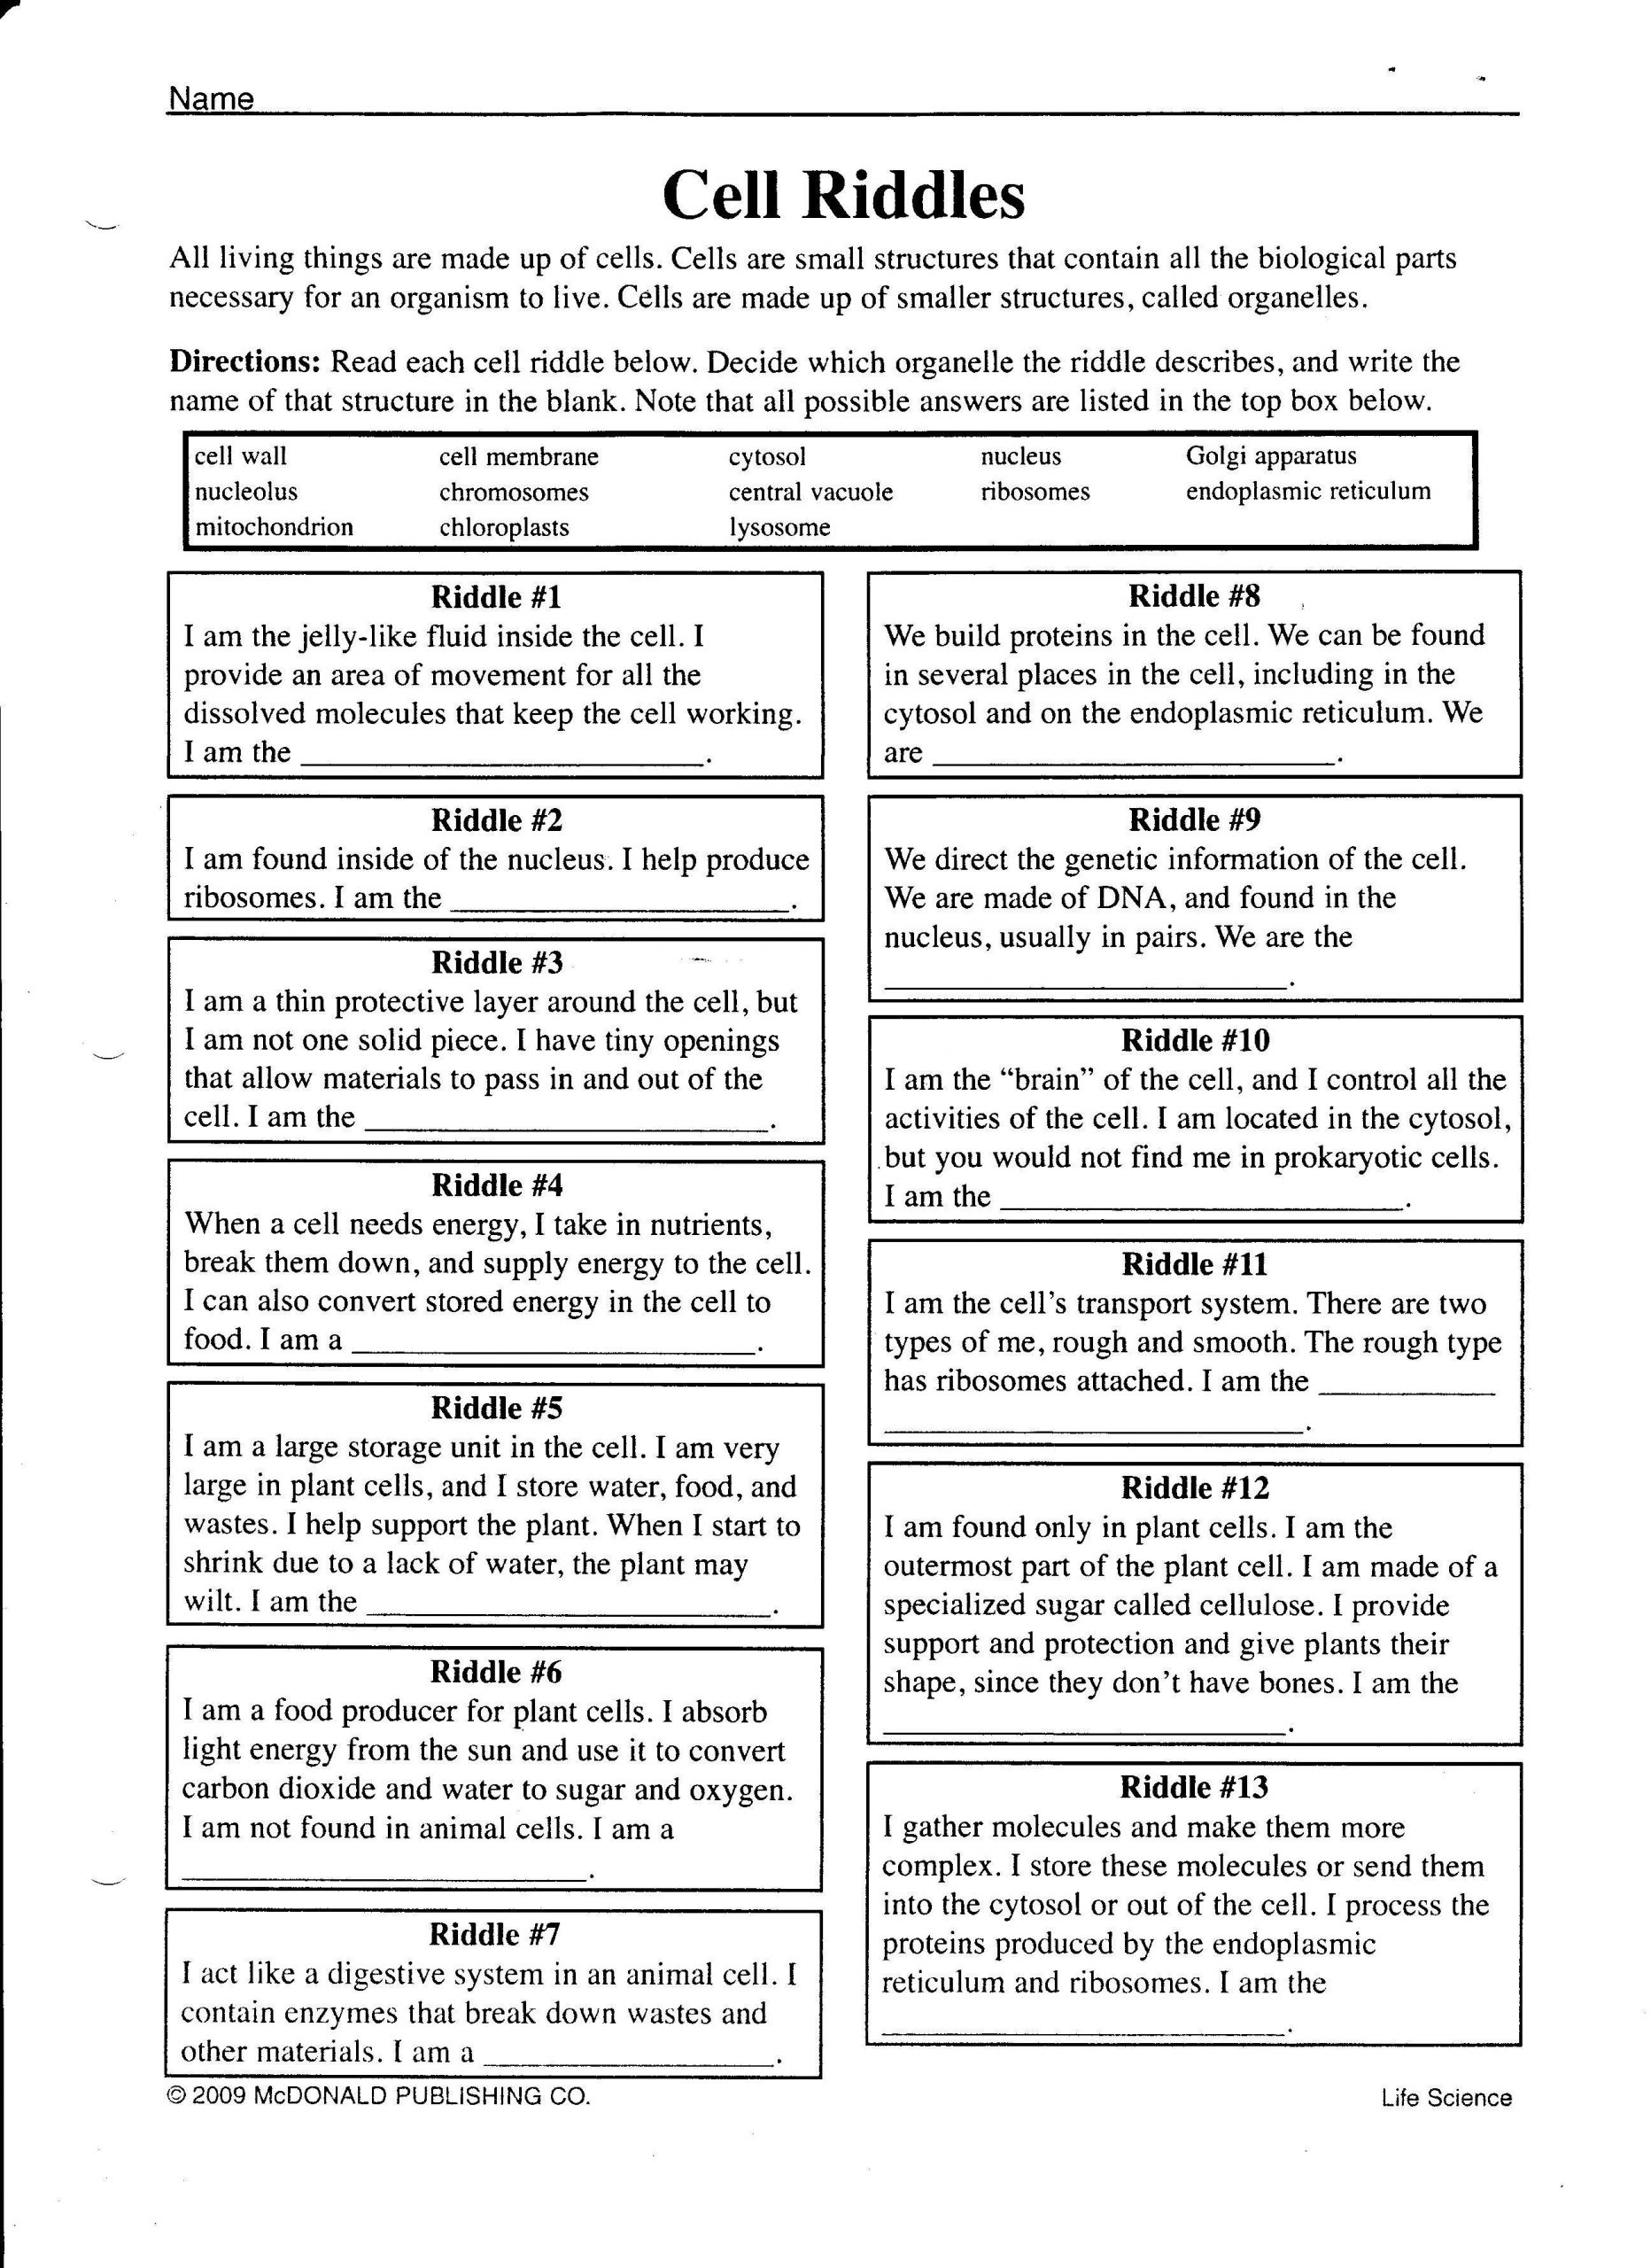 Cells and their organelles Worksheet Prokaryotic and Eukaryotic Cells Worksheet Answers